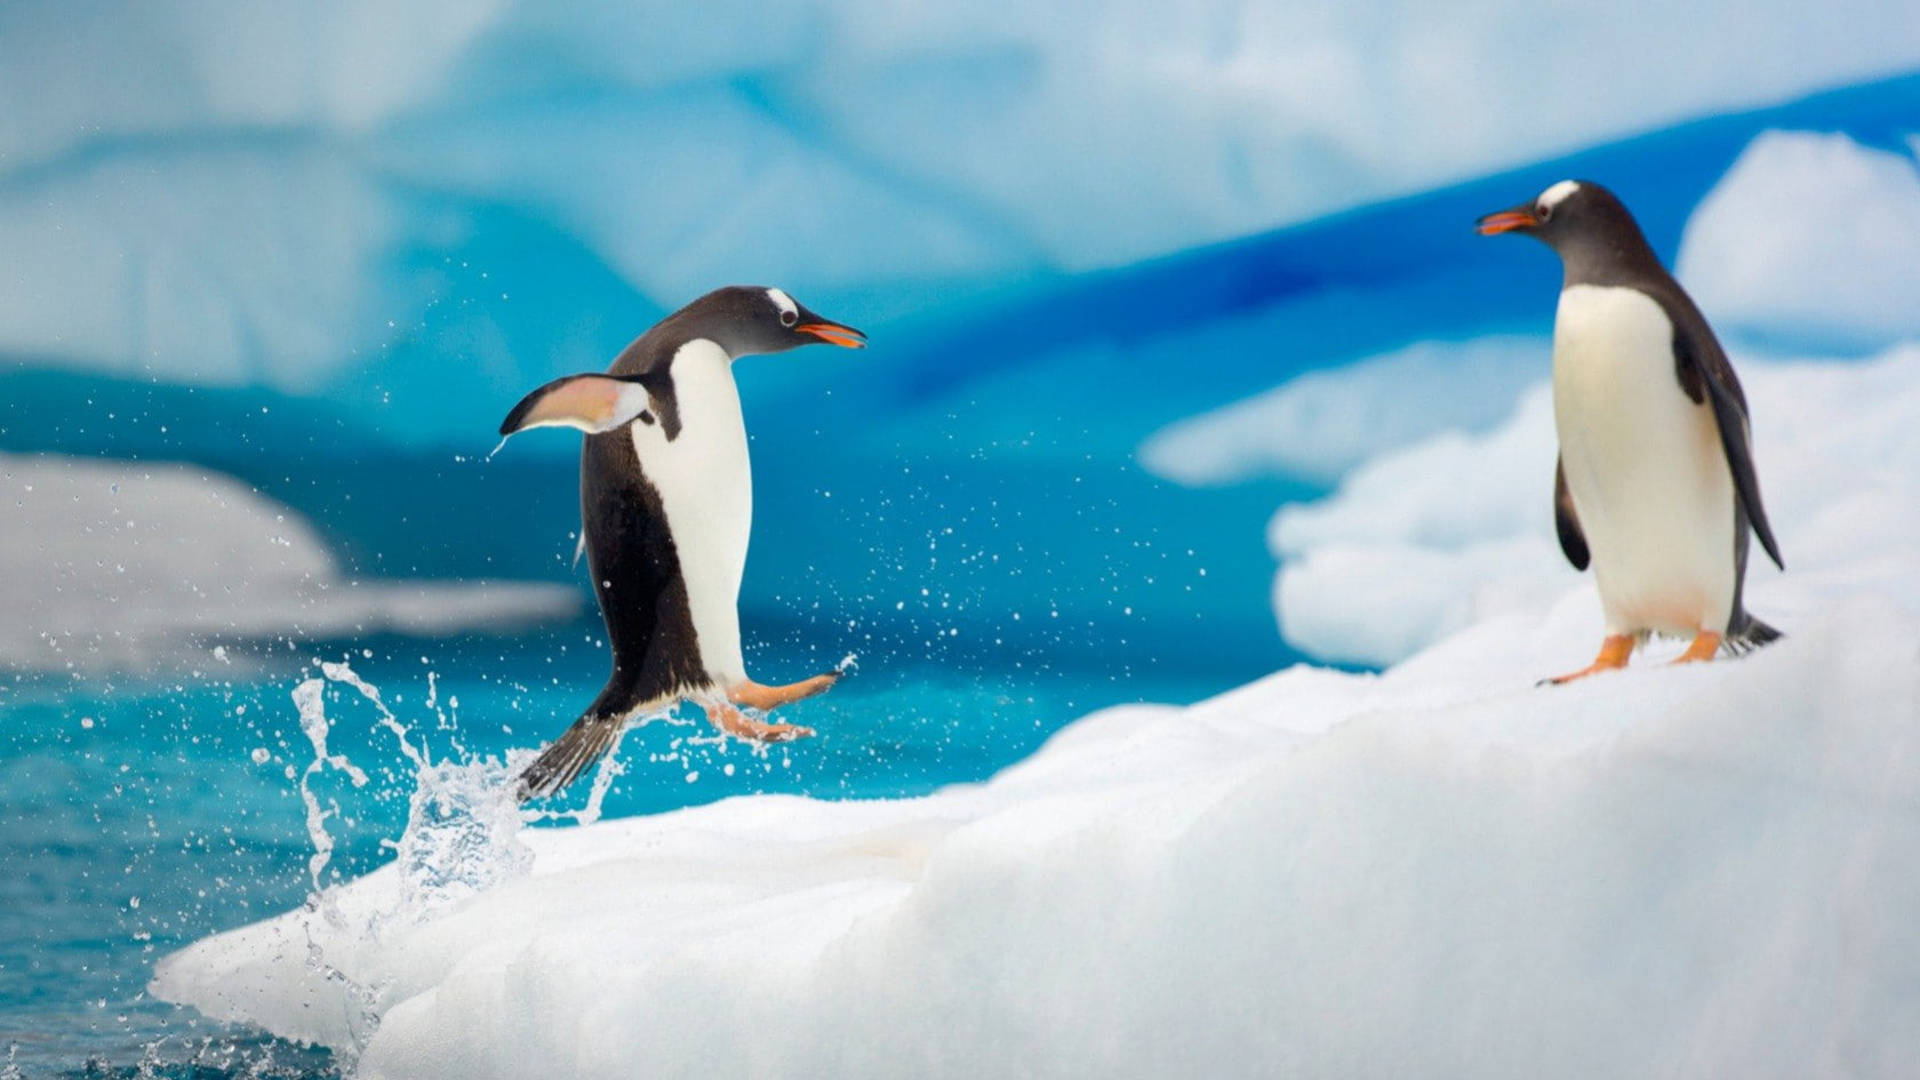 Penguins In Cold Antarctic Winter Background